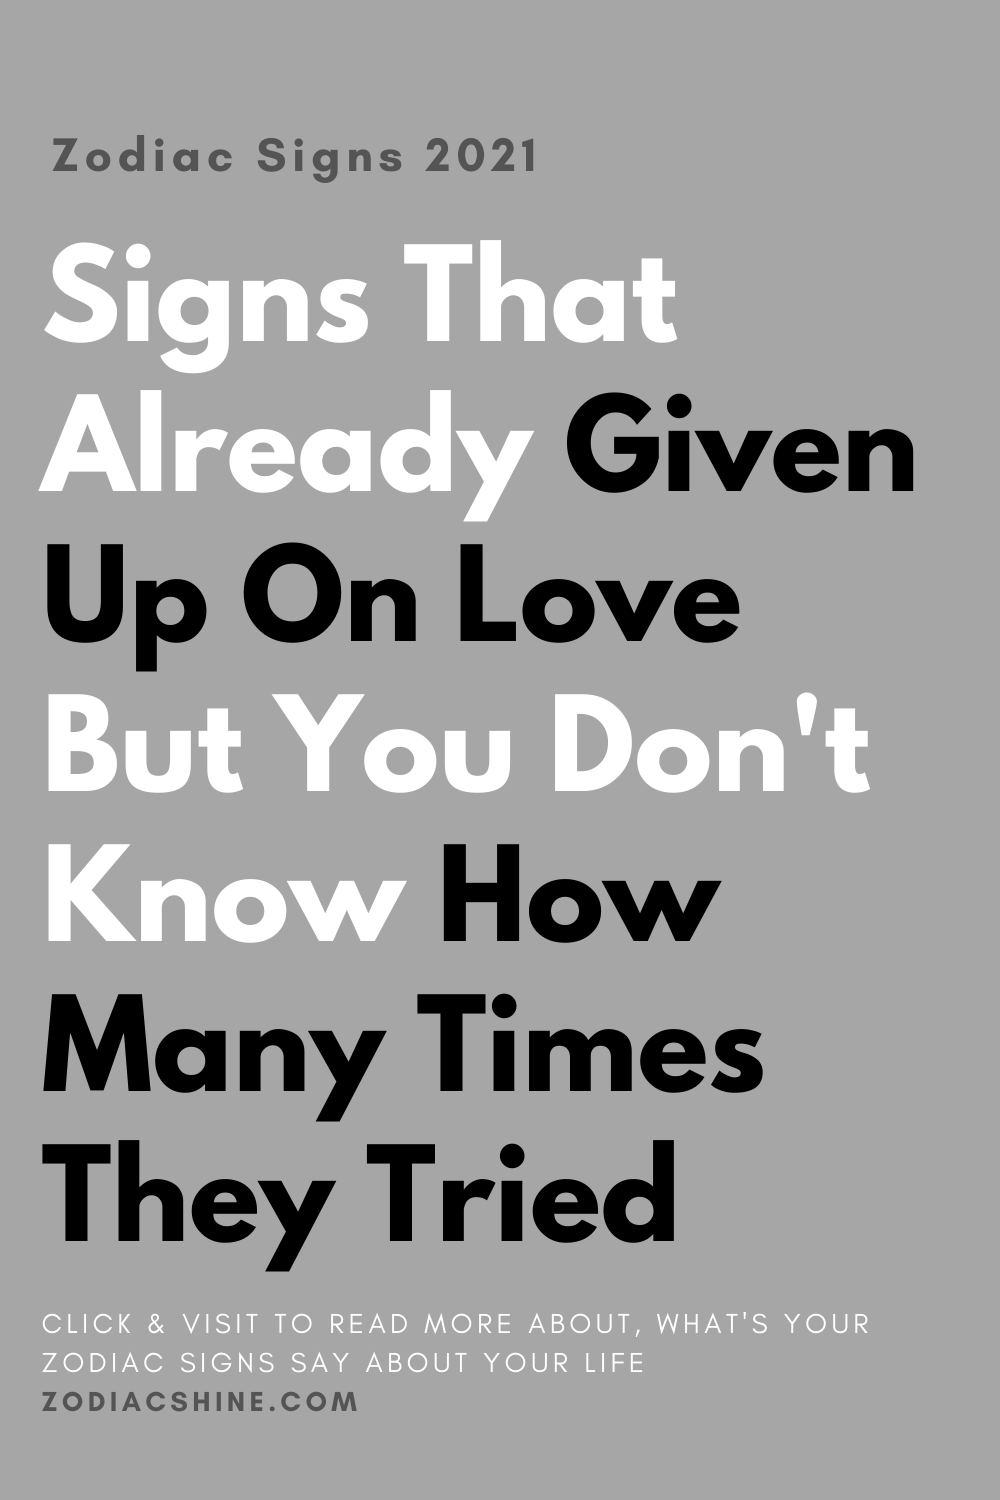 Signs That Already Given Up On Love But You Don't Know How Many Times They Tried